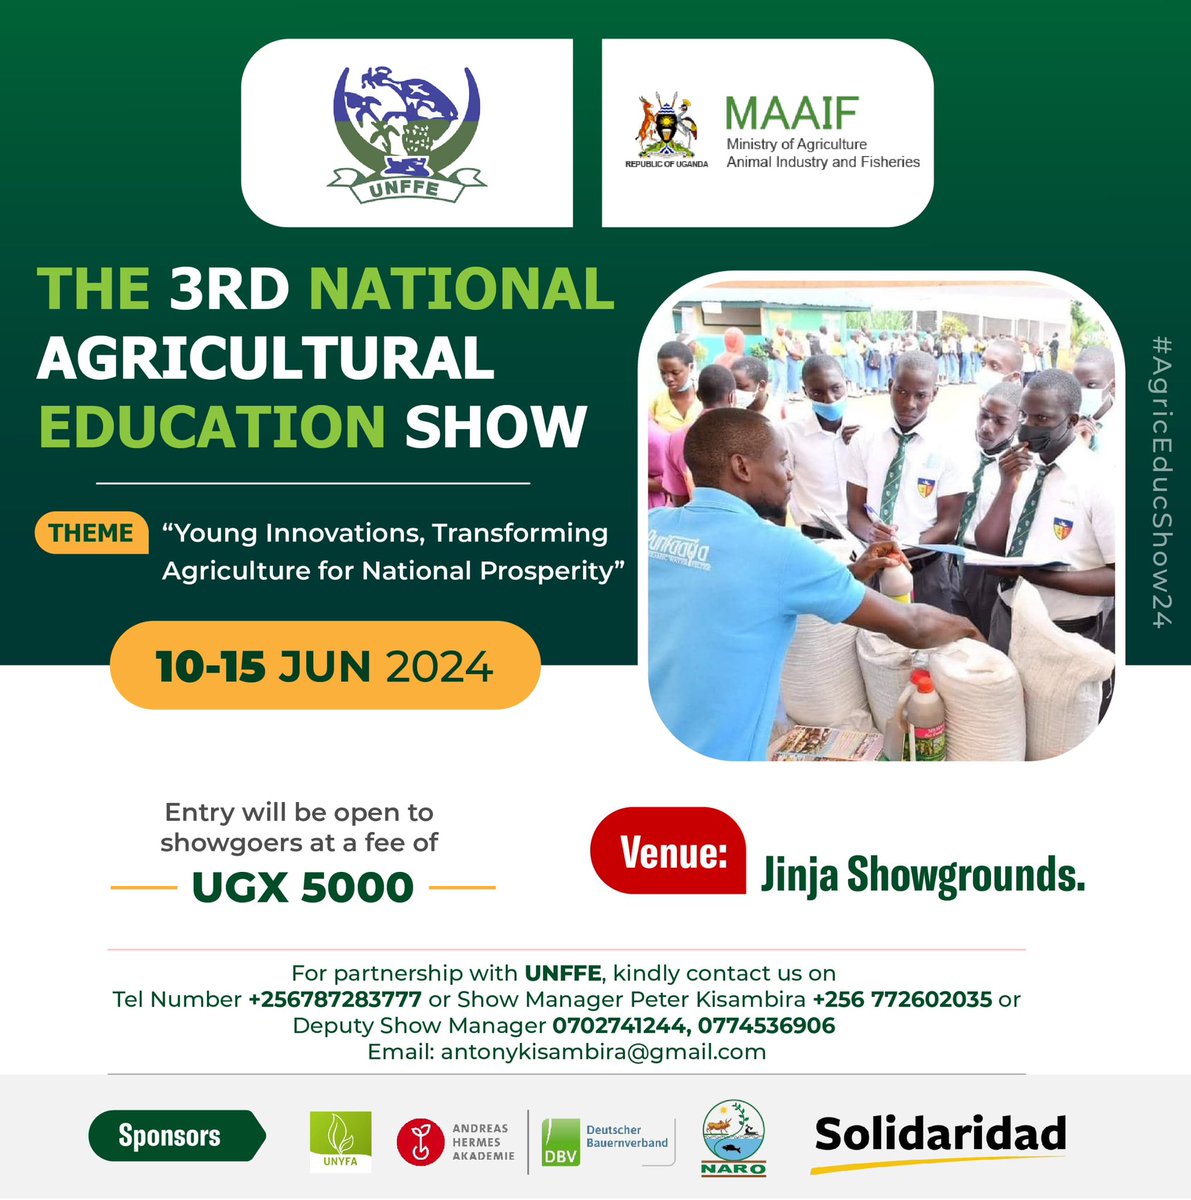 The Educational Show features youth-led innovation and technology exhibitions, along with tailored enterprise trainings, school debates, policy dialogues, mentorship sessions, success story sharing, and awards for outstanding youth in agribusiness.

#AgricEducShow24